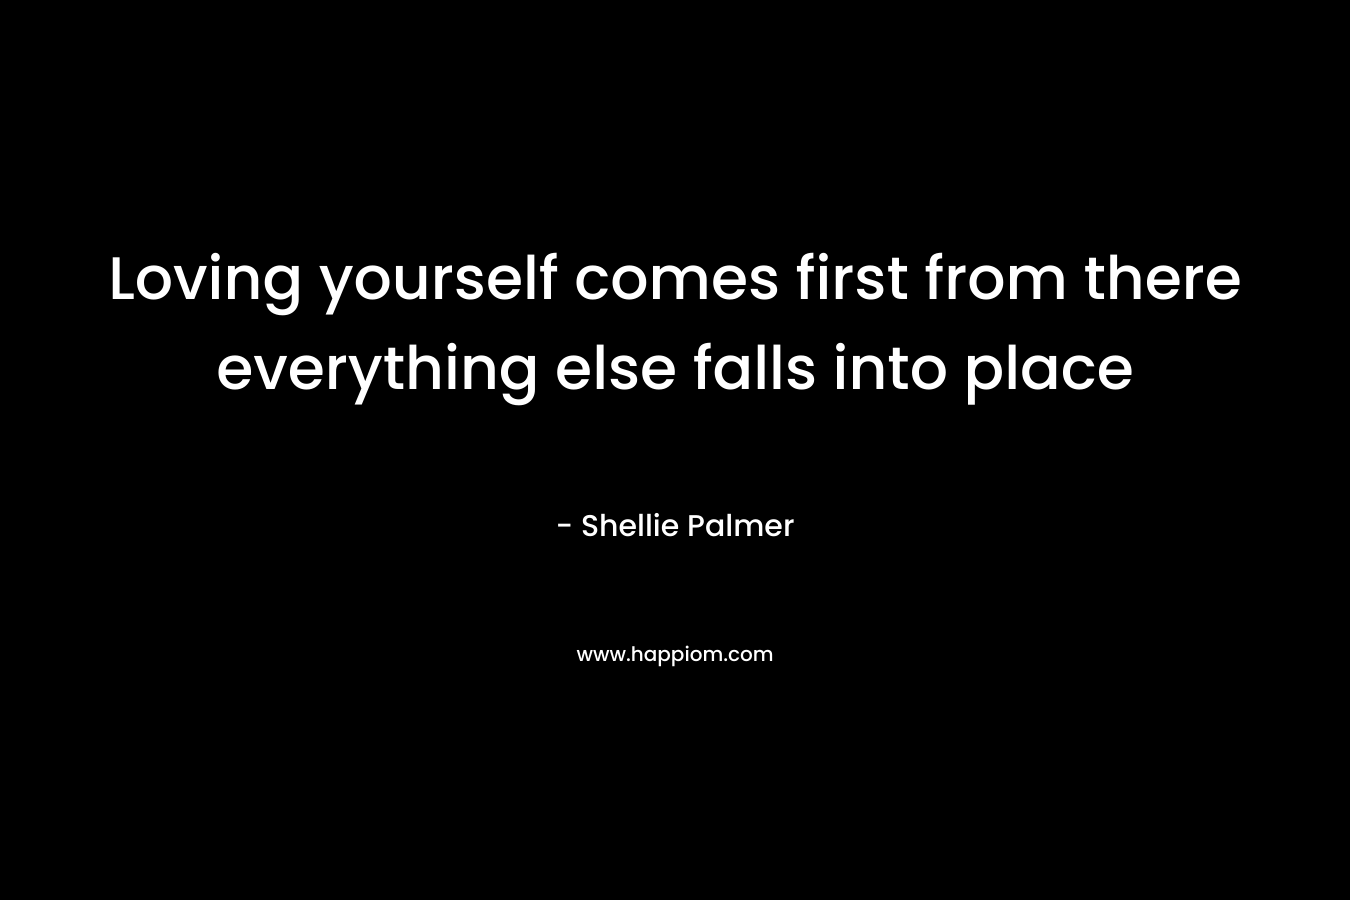 Loving yourself comes first from there everything else falls into place